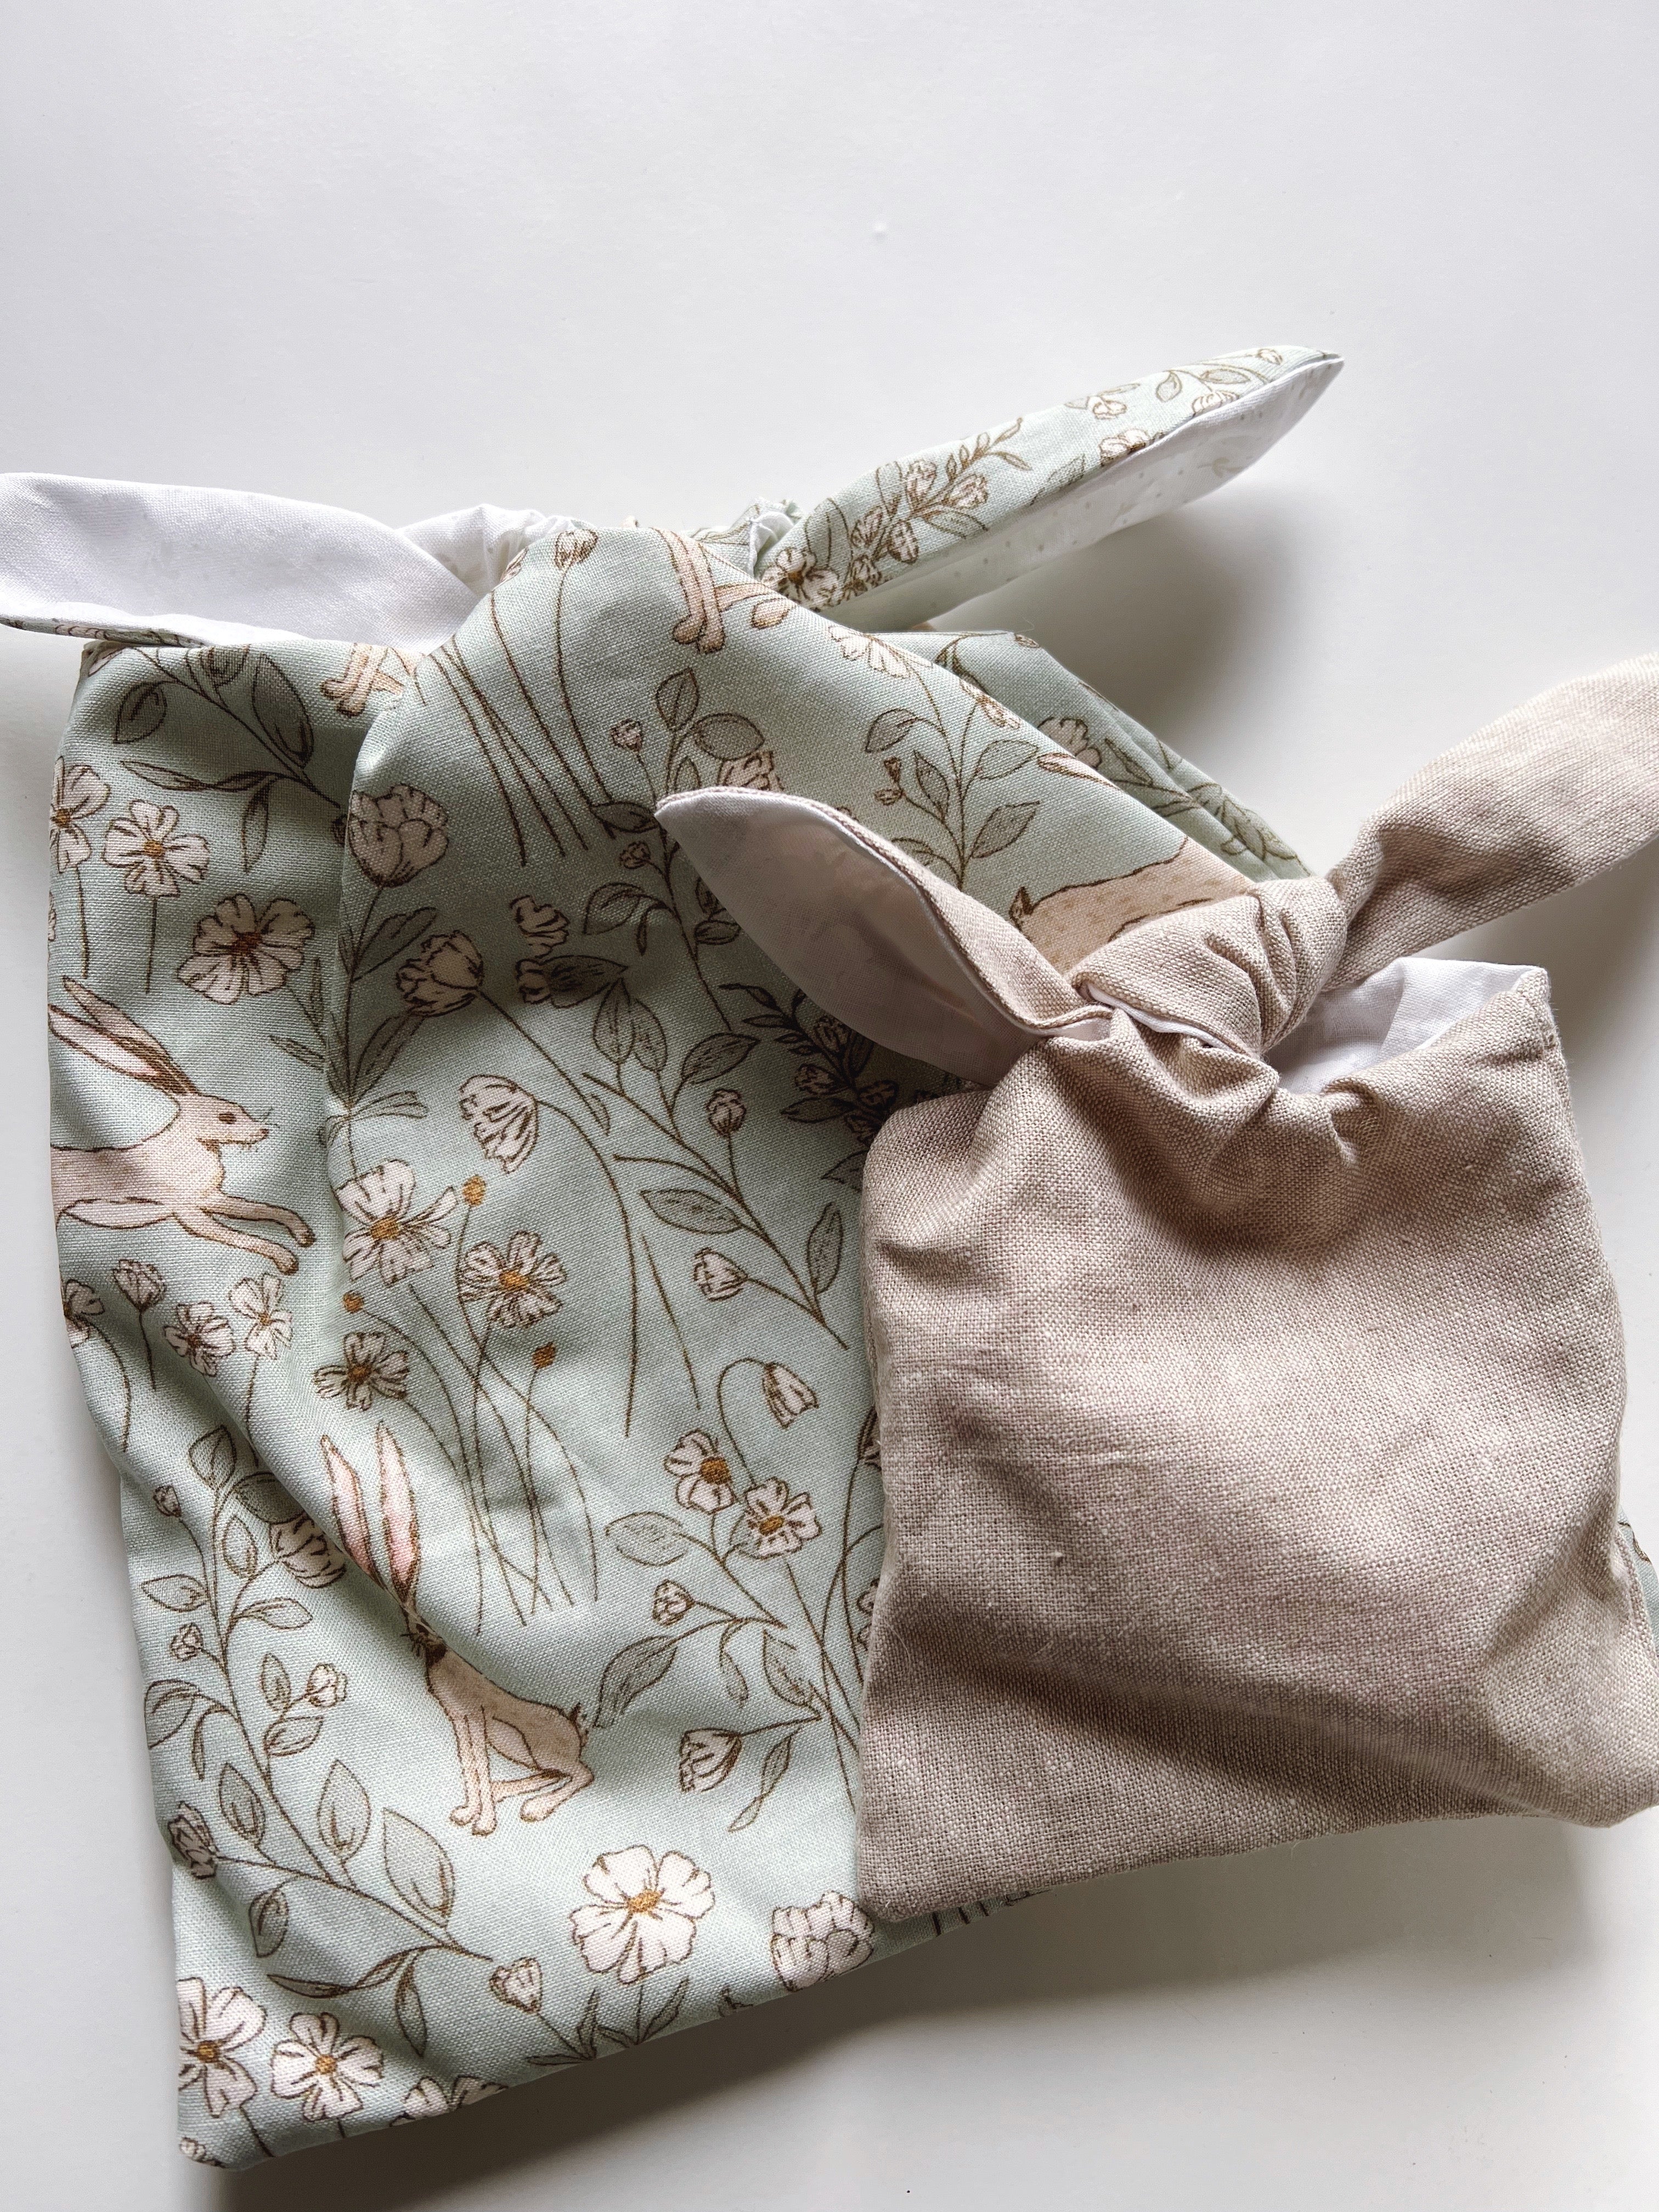 easter bunny bags - hares + linen